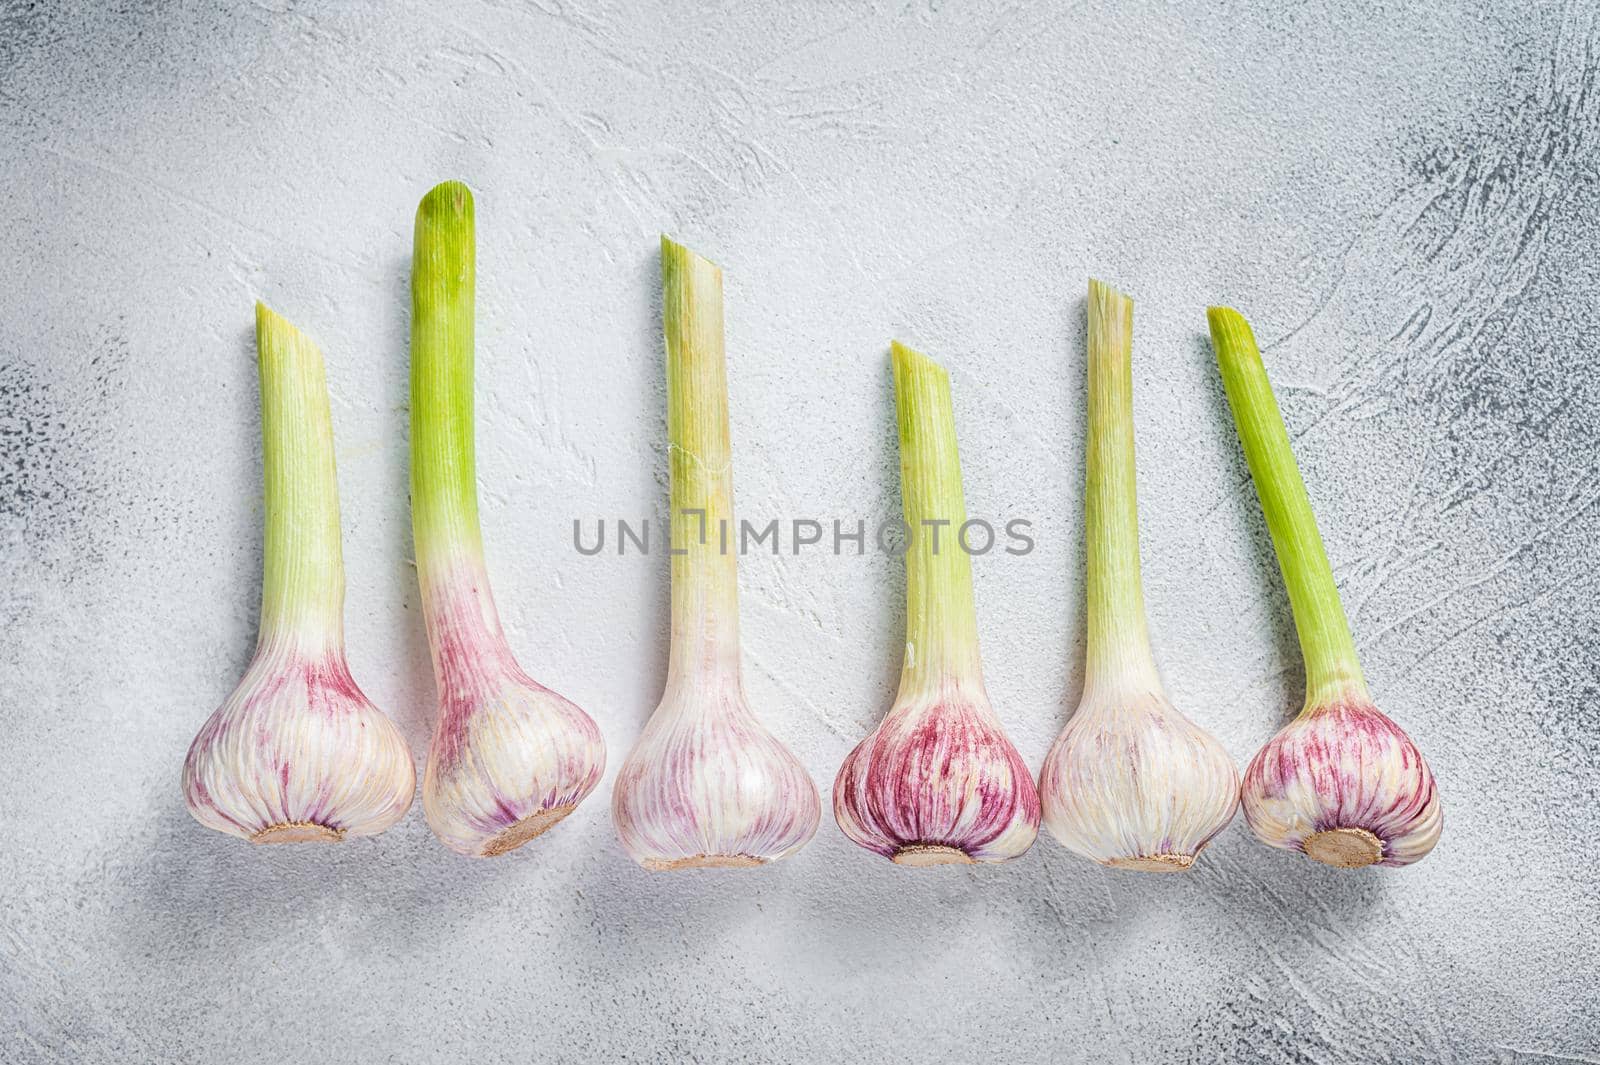 Spring young garlic bulbs on kitchen table. White background. Top view by Composter